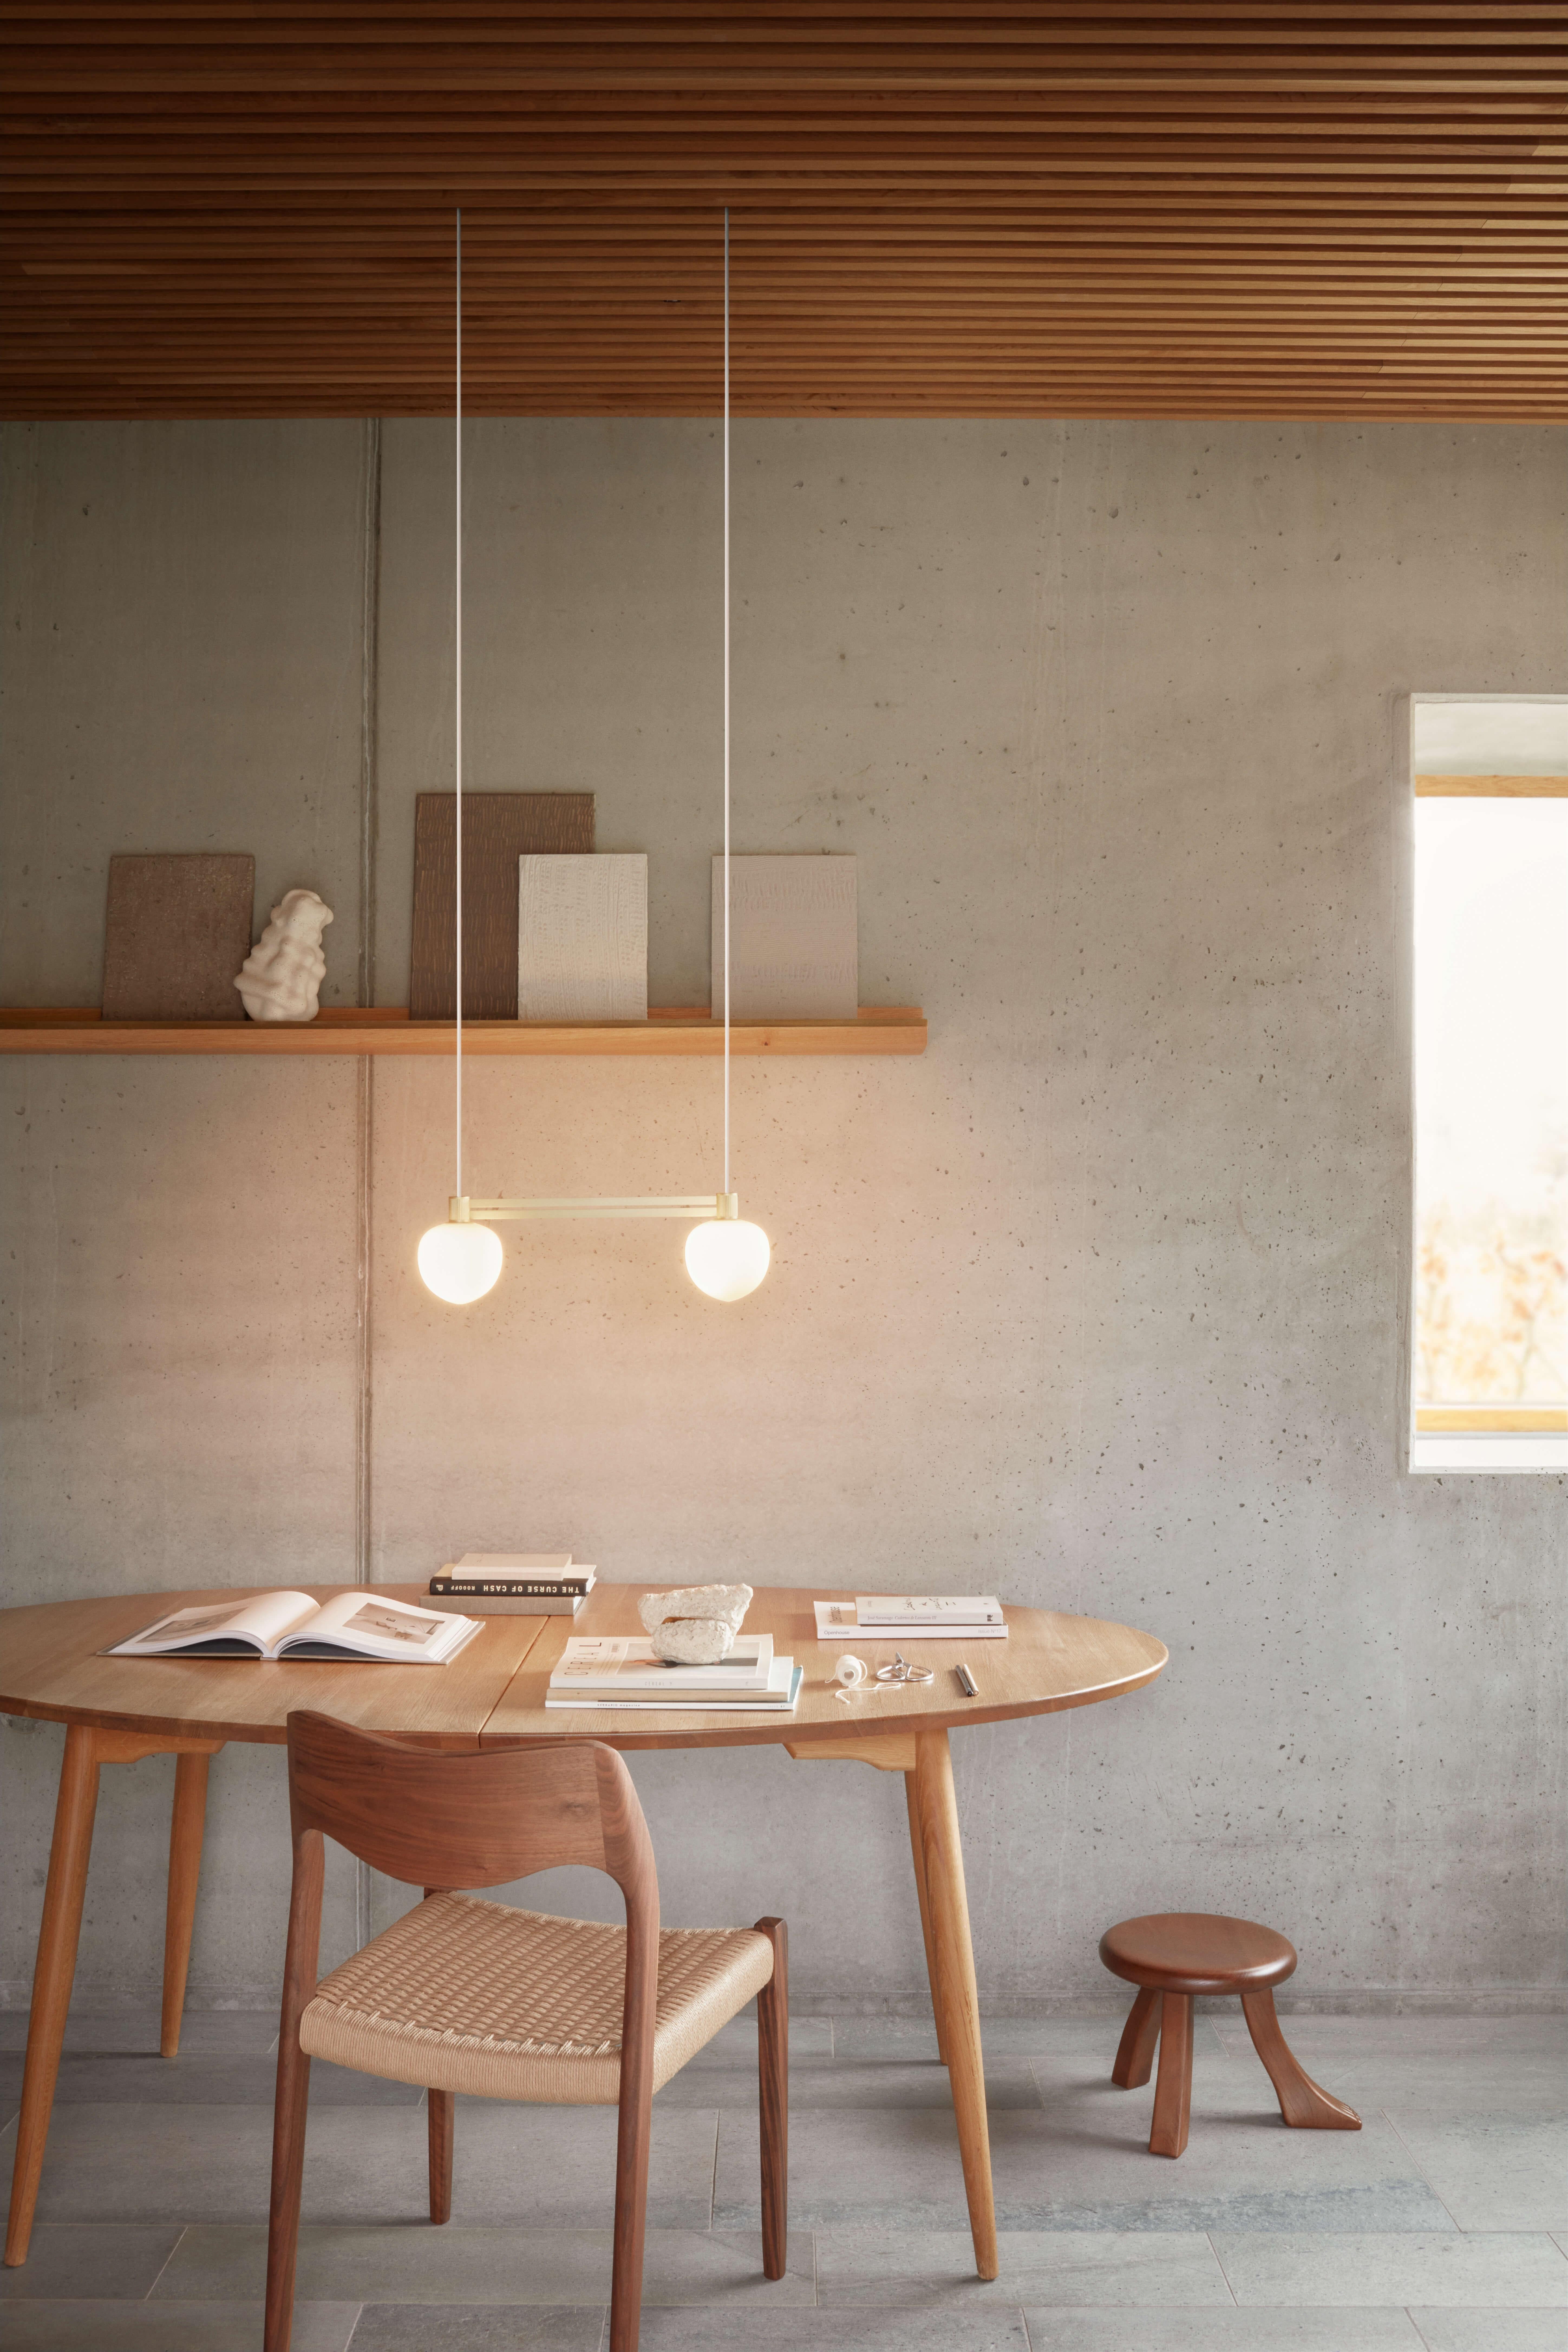 Memoir 120 Pendant Lamp signed by GamFratesi for LYFA.
Side by Side

DIMENSIONS
W 50.4 x D 12 x H 15.6 cm

COLOURS
Black or brass

Textile wire (white) 600cm
Socket: G9
Max wattage: 28 Watt
Energy class: The luminaire is compatible with bulbs of